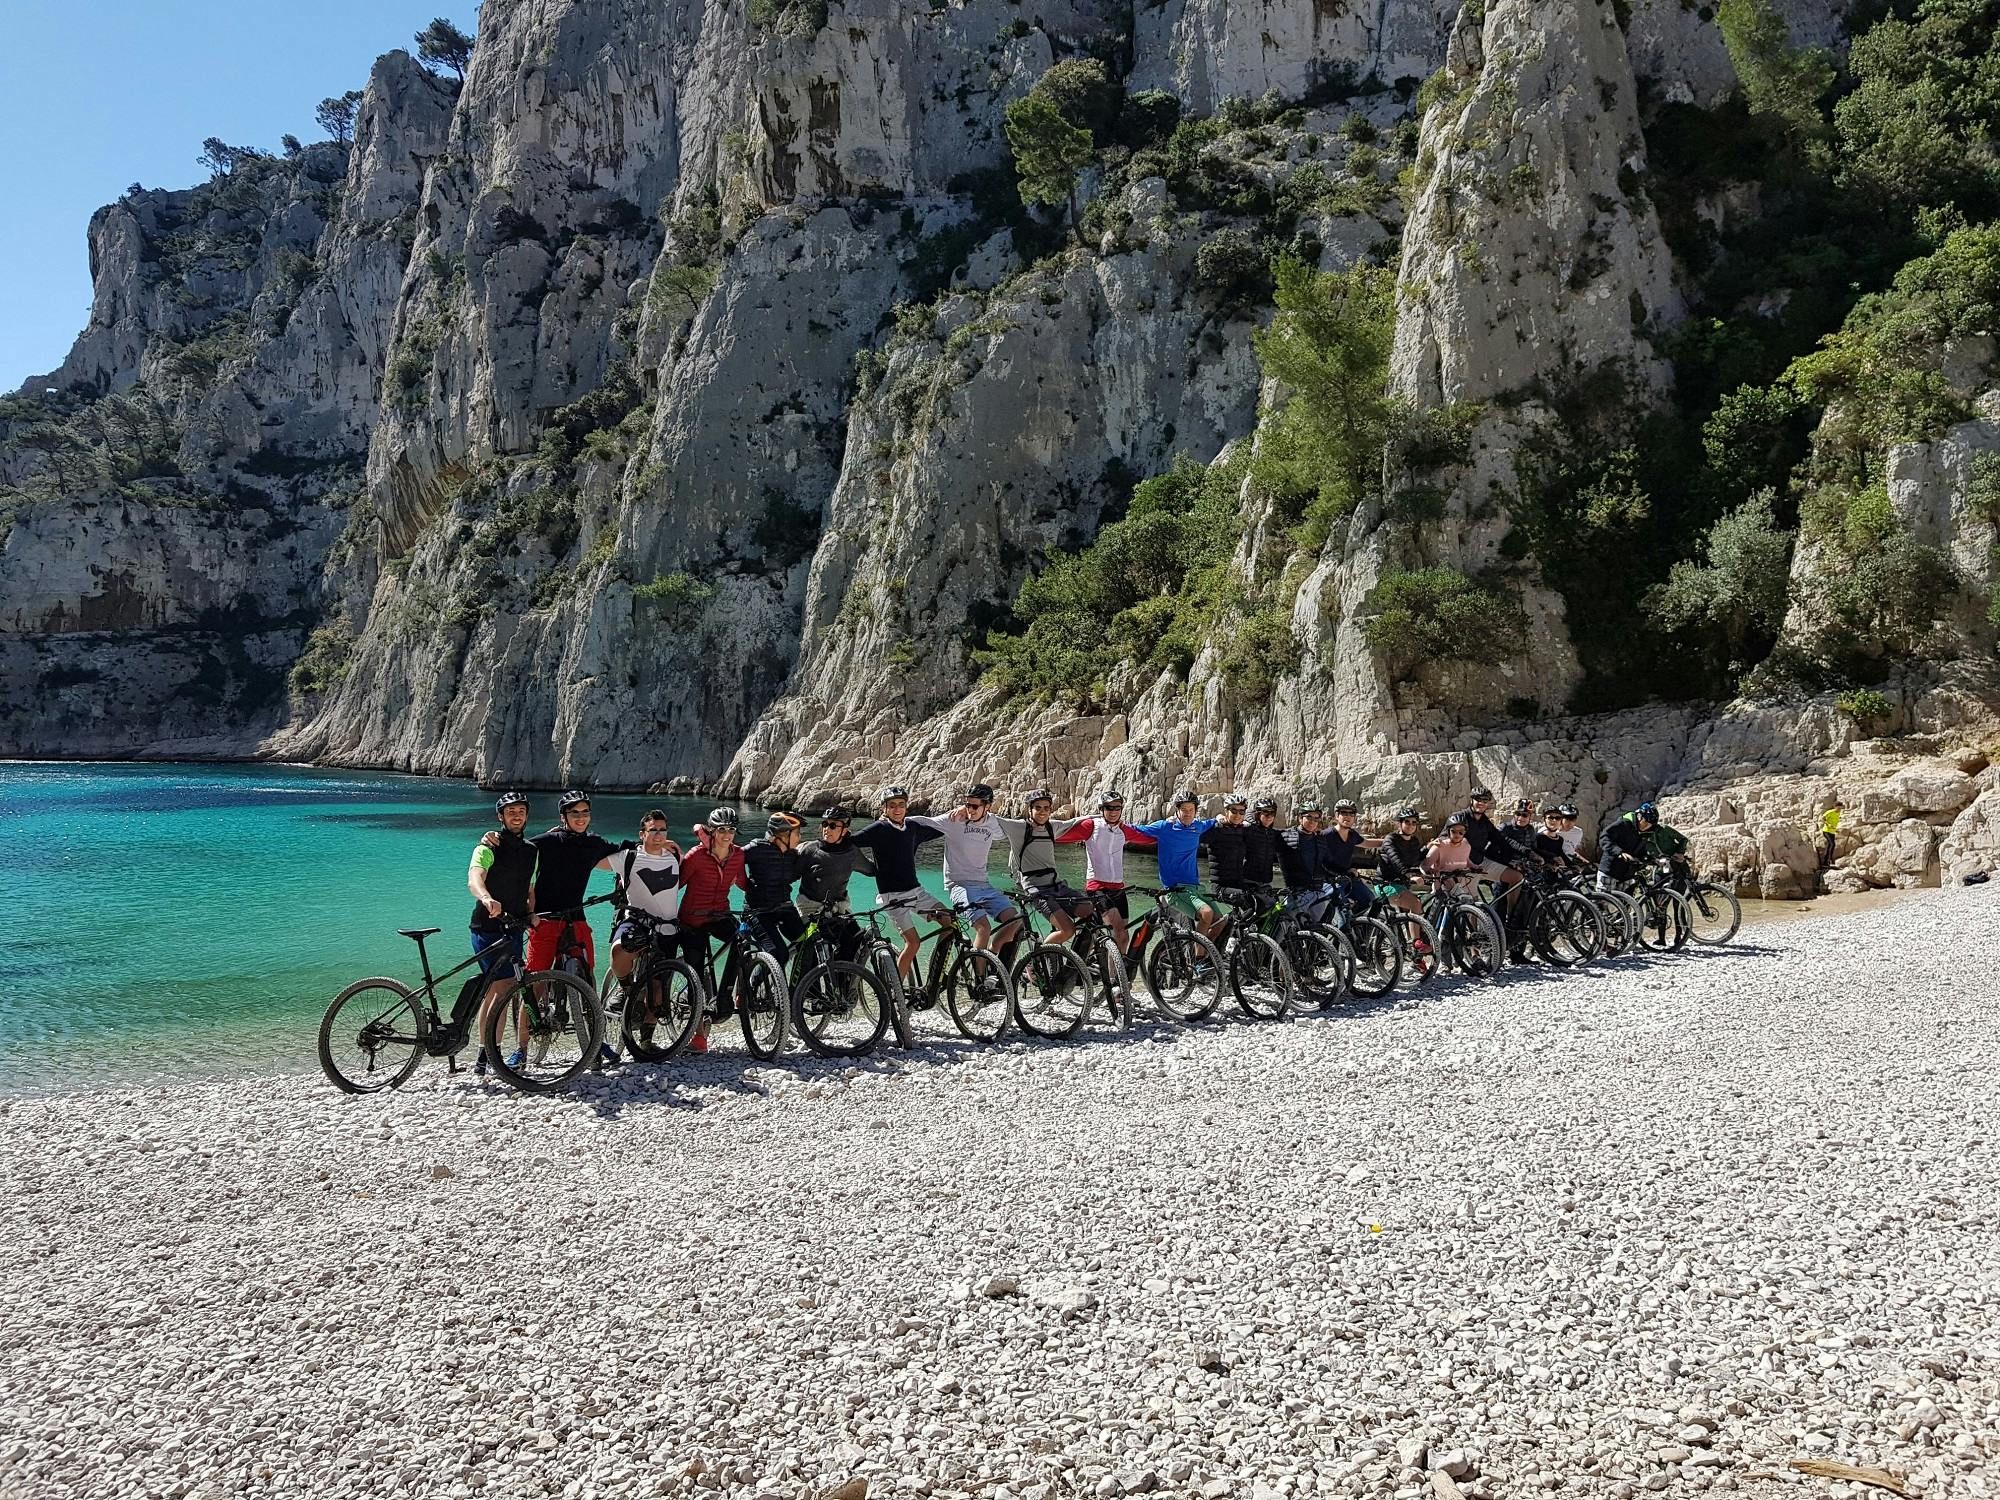 Mountain bike rental for Calanques National Park and Marseille